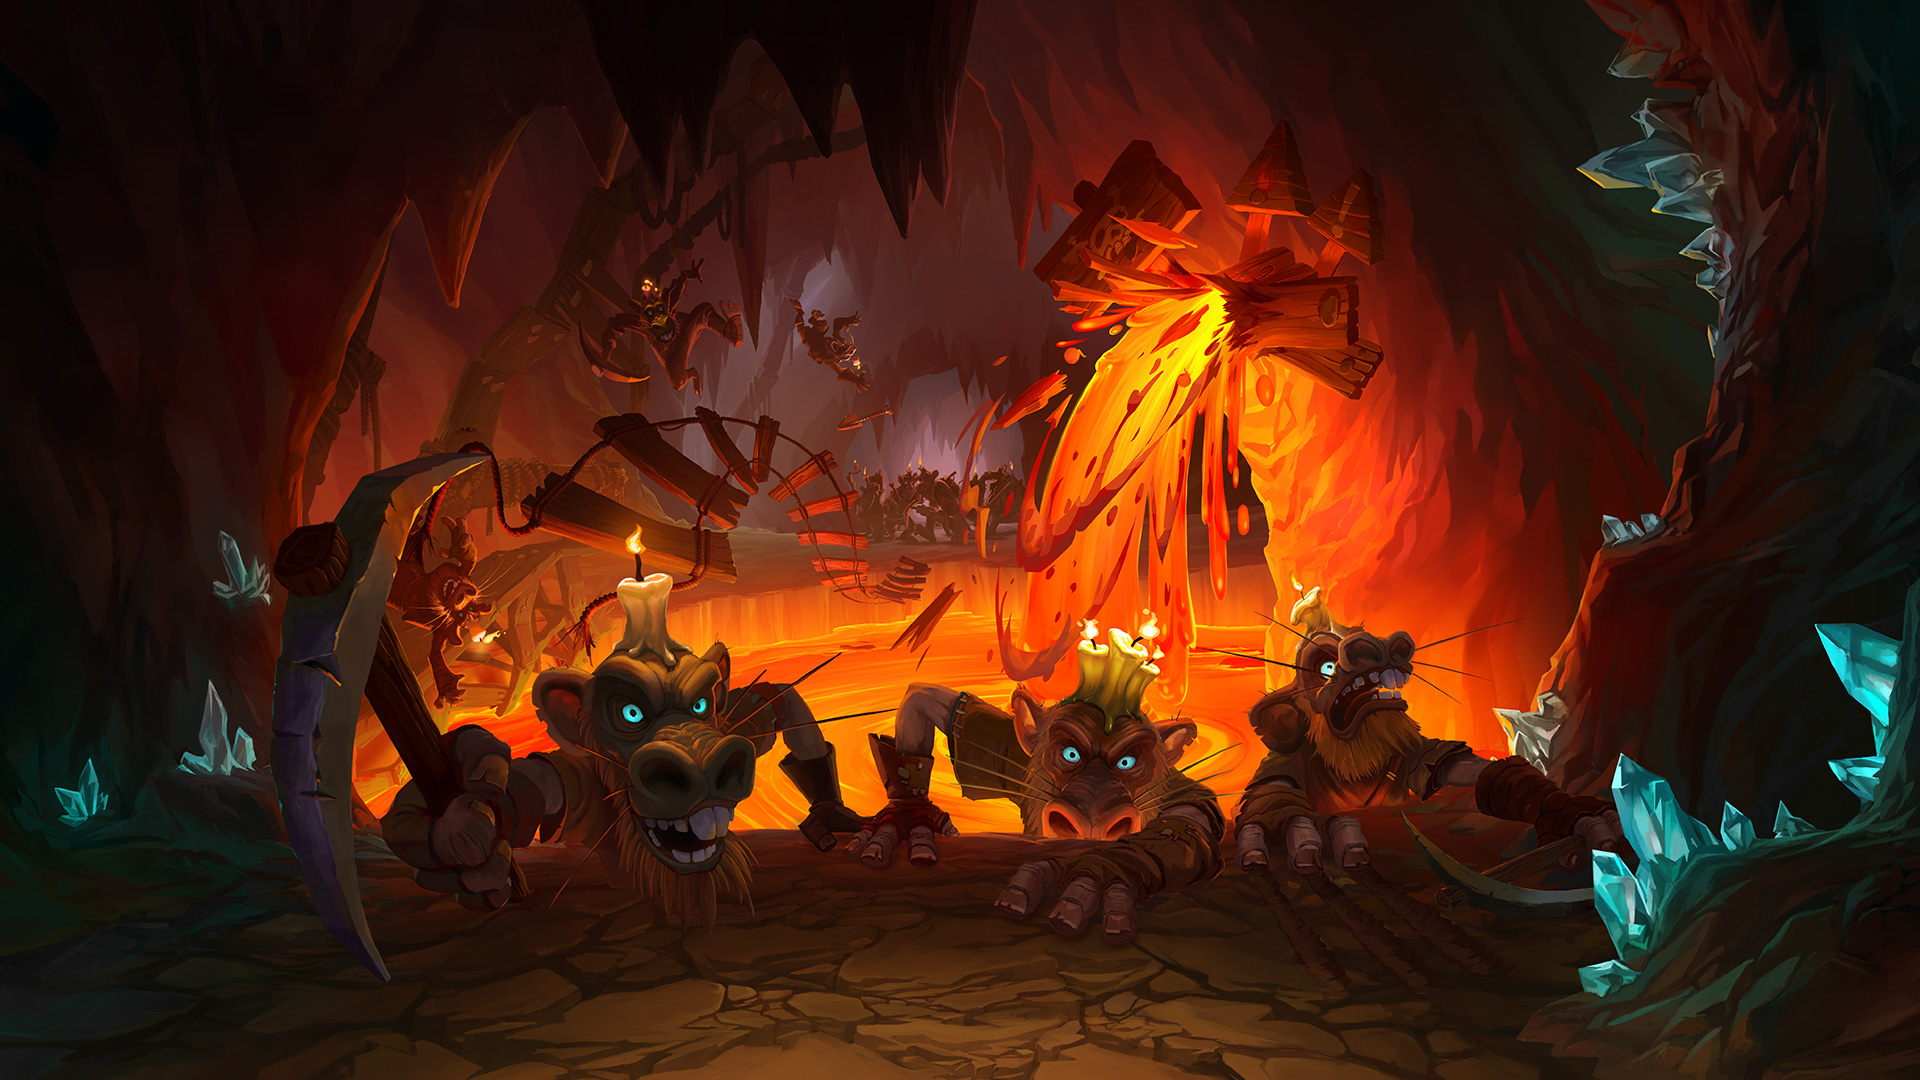 Hearthstone, Warcraft, Artwork, Digital art, Cave, Dungeon, Underground, Kobolds, Hearthstone: Kobolds and Catacombs, Video games, Candles, Lava, Pickaxes Wallpaper